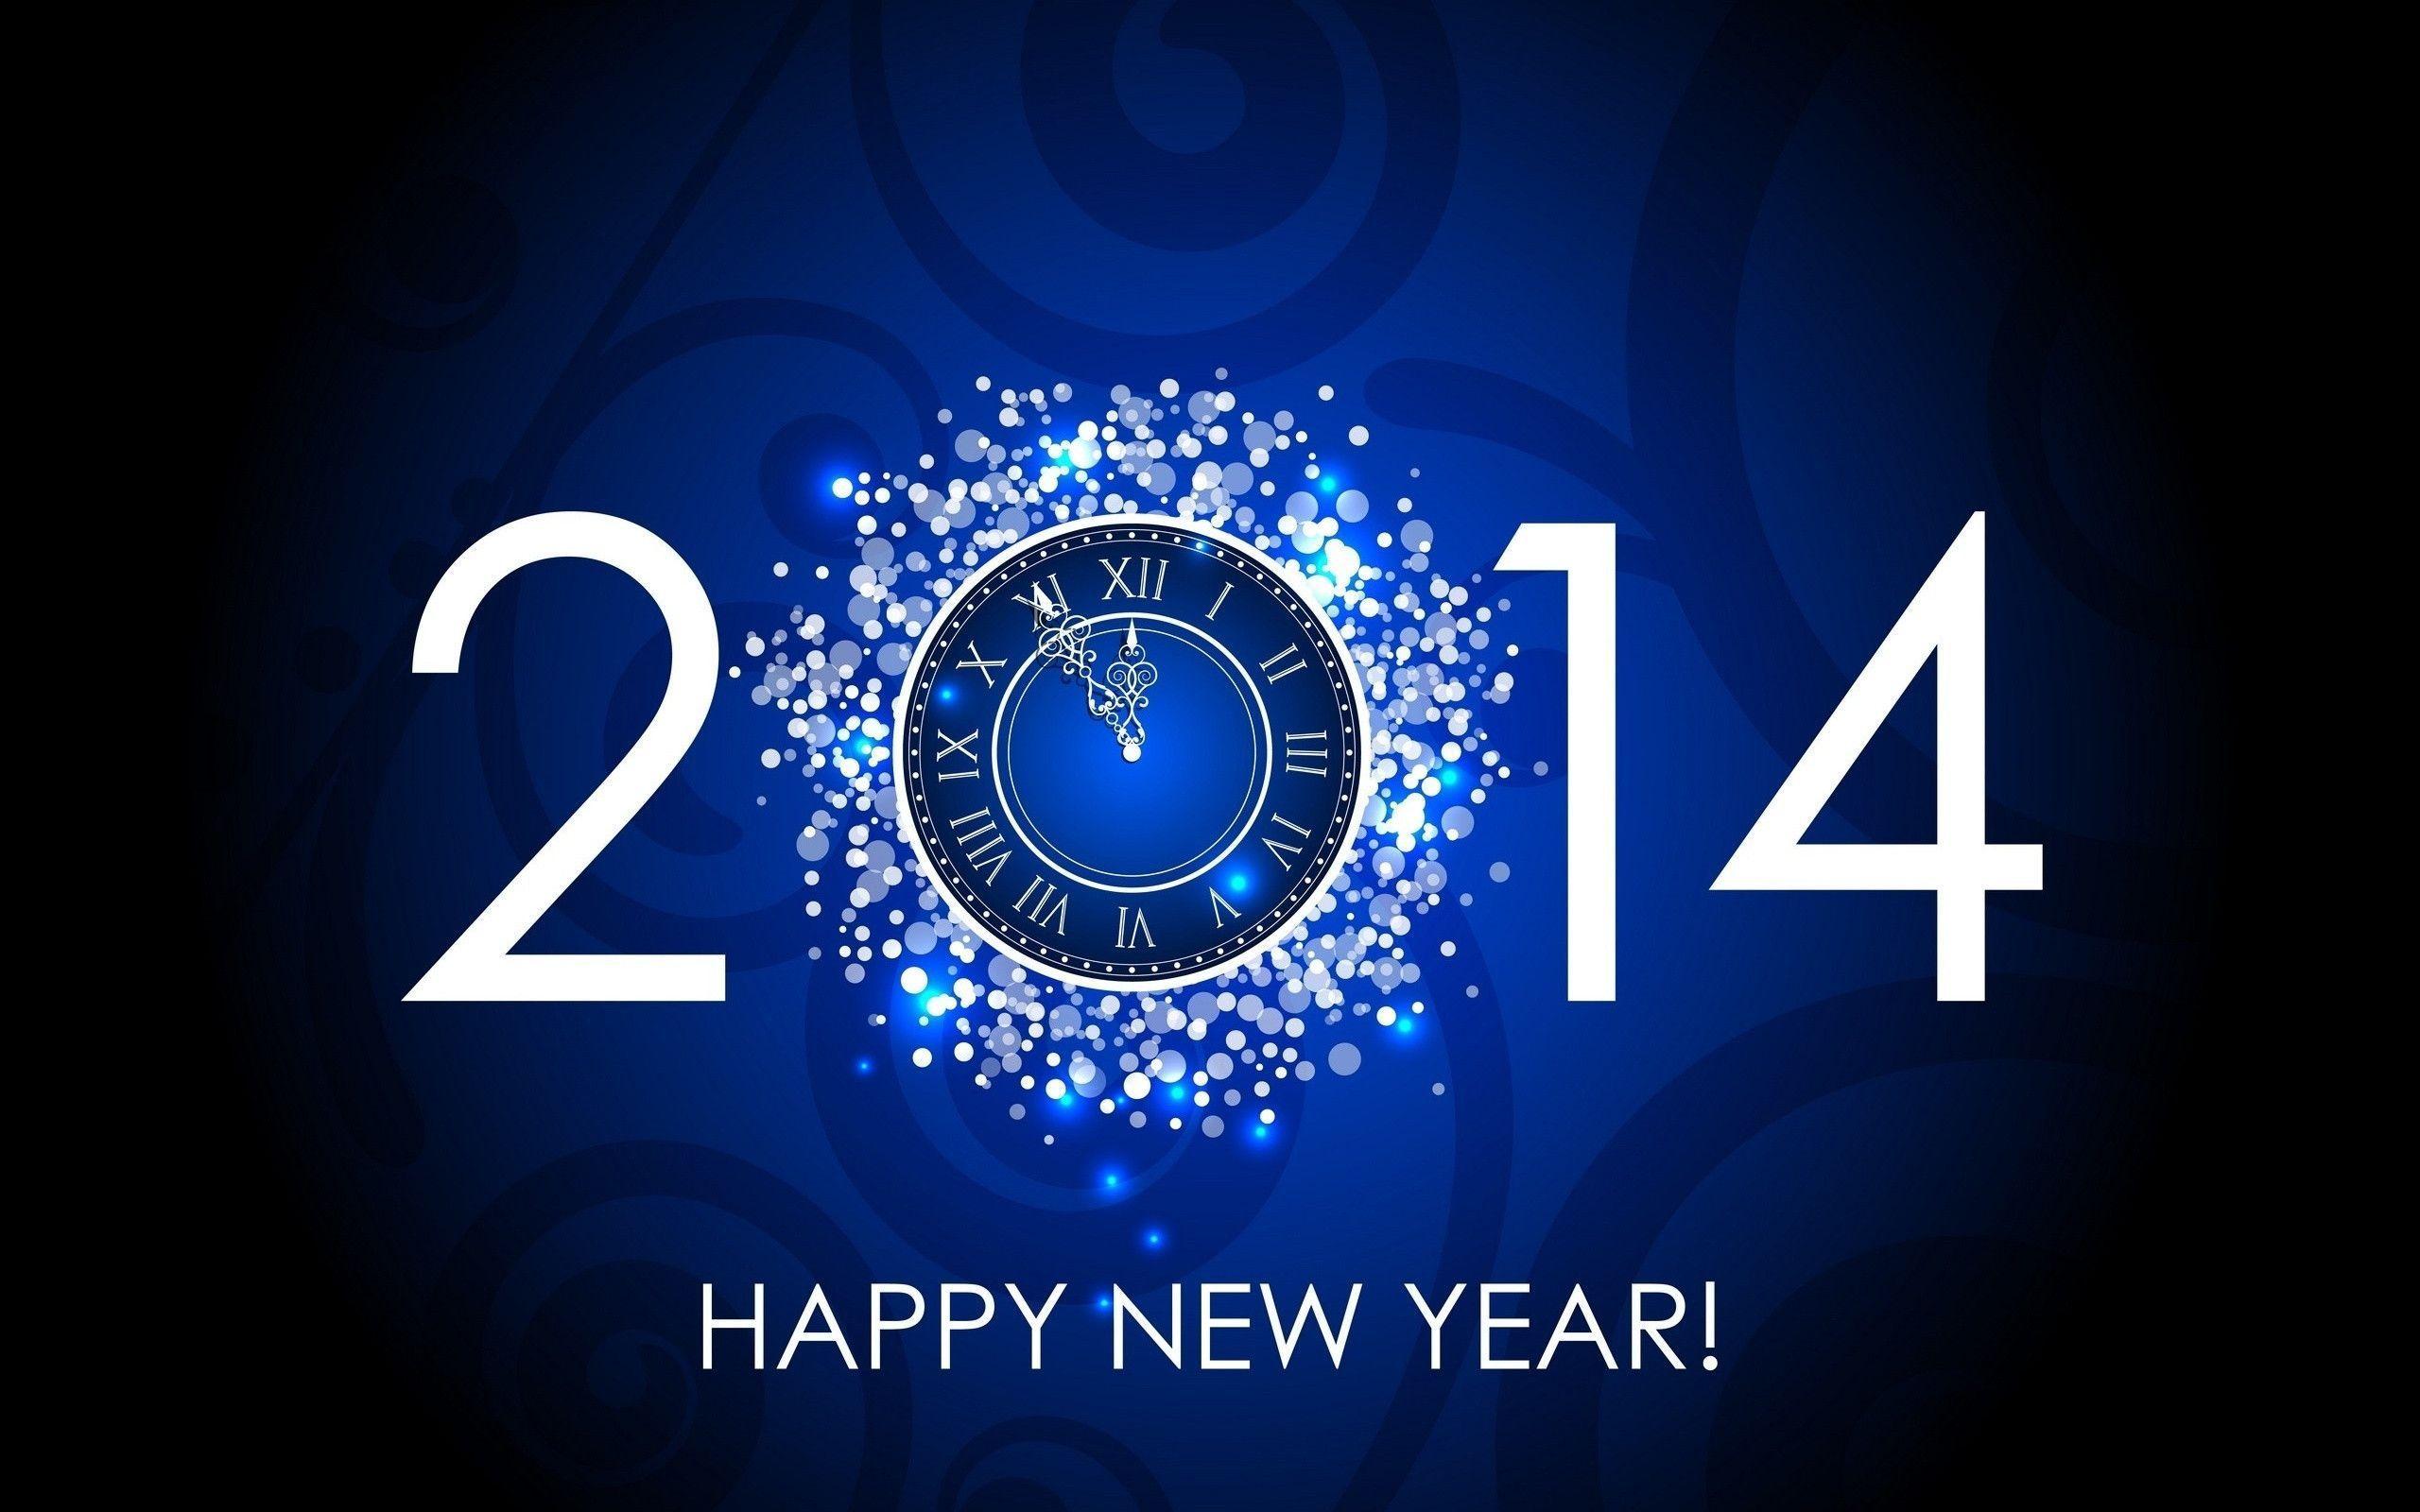 Blue Happy New Year 2014 Wallpaper Wide or HD